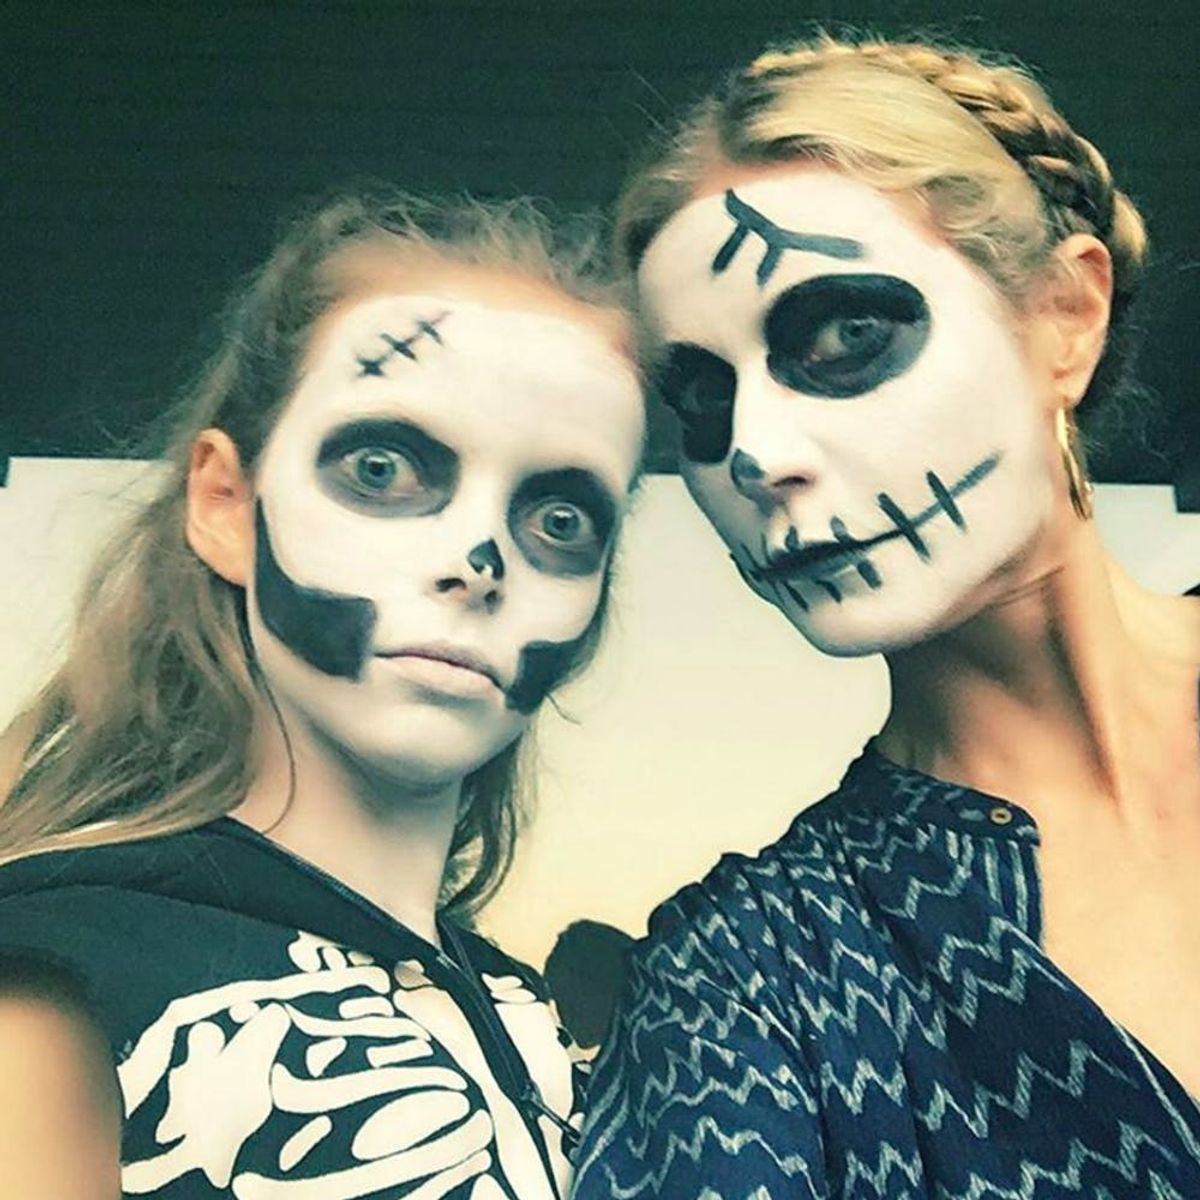 16 Celebs Who Proved Amazing Halloween Makeup Can Make Your Costume